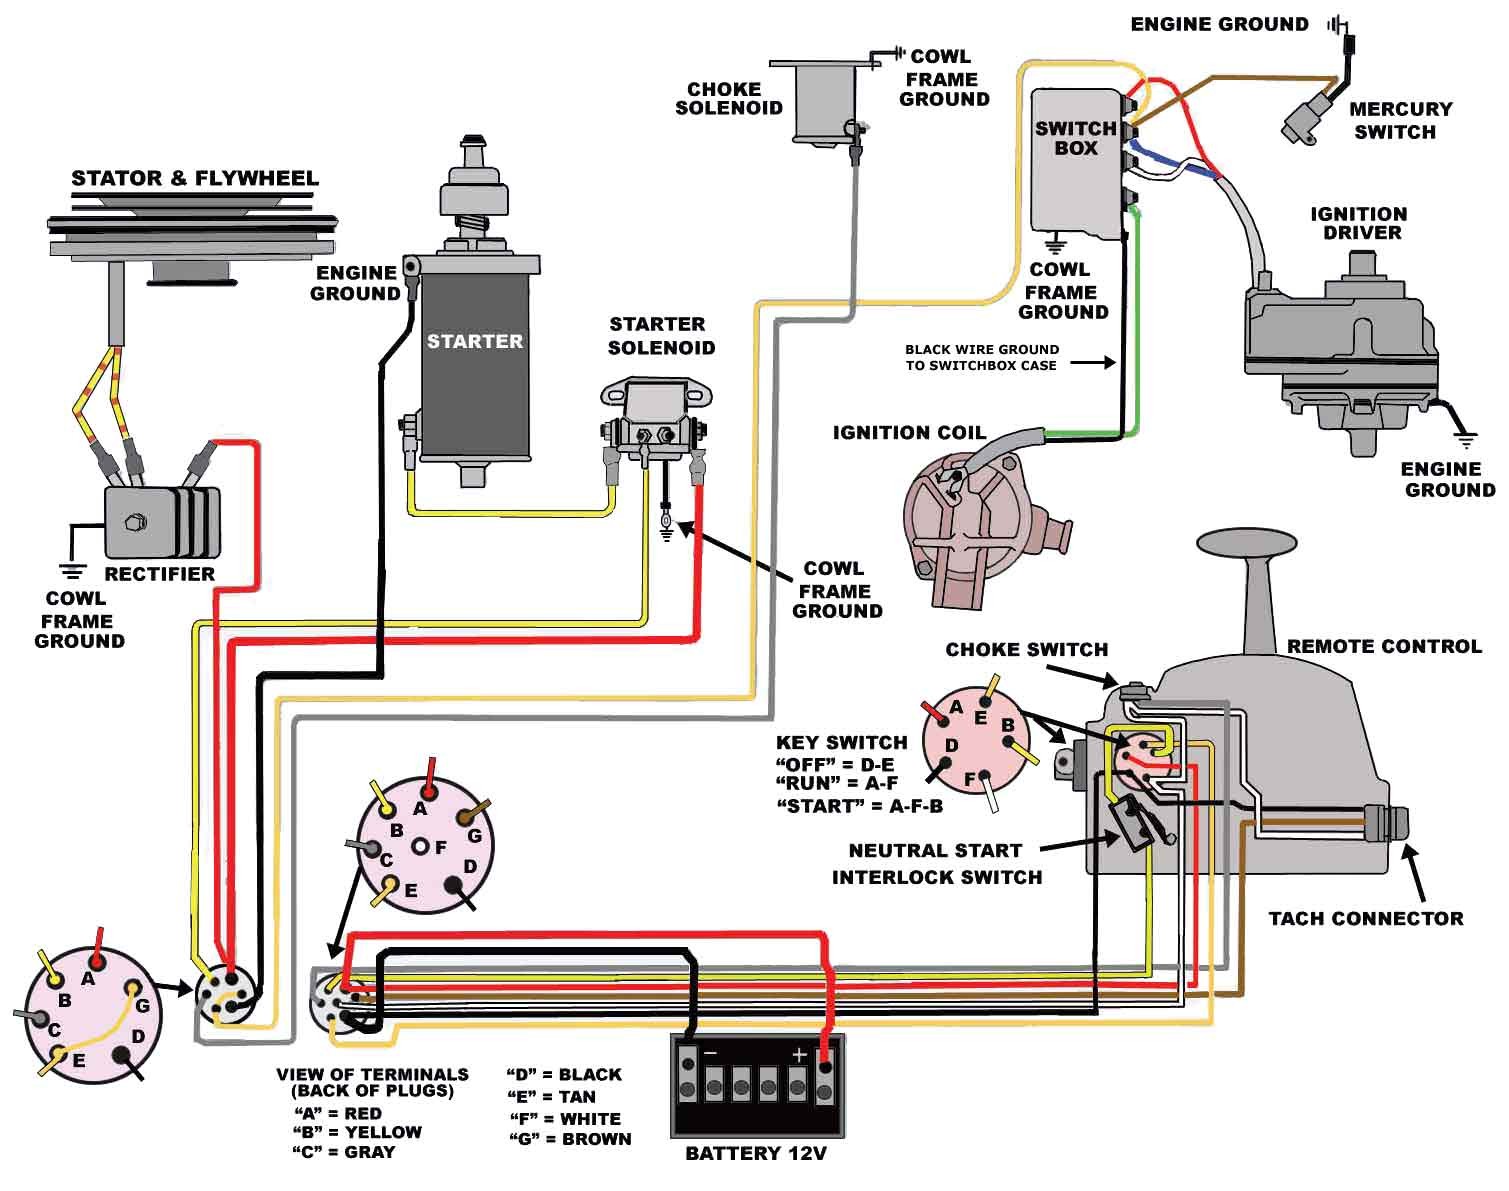 Schematic Yamaha Outboard Wiring Harness Diagram from mainetreasurechest.com